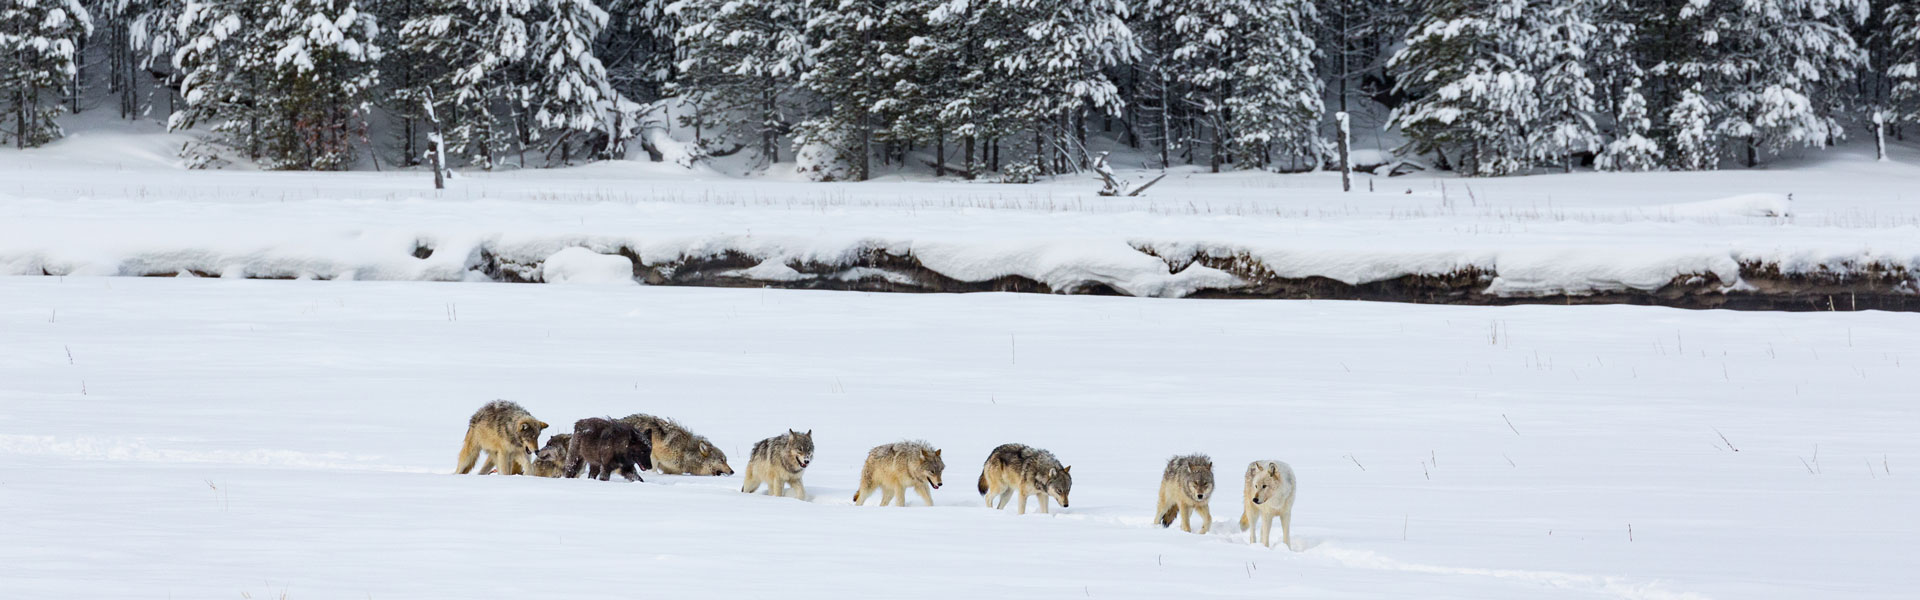 Wolf pack in Yellowstone Park